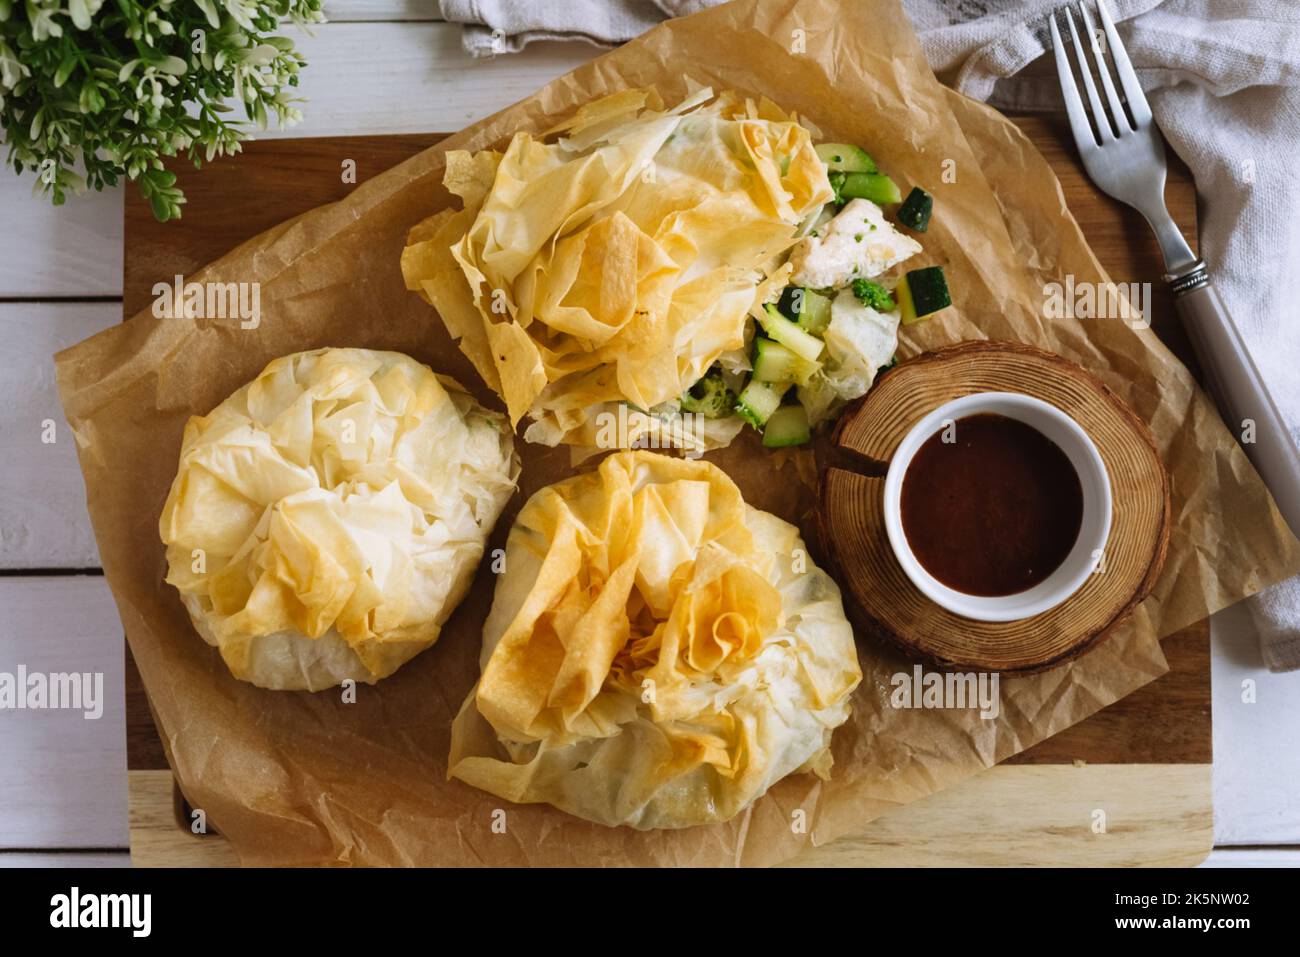 Phyllo Purses. Filo dough filled with chicken and vegetables on parchment paper with barbecue sauce. Three baked filled veggie pastry bags. Mixed Vege Stock Photo